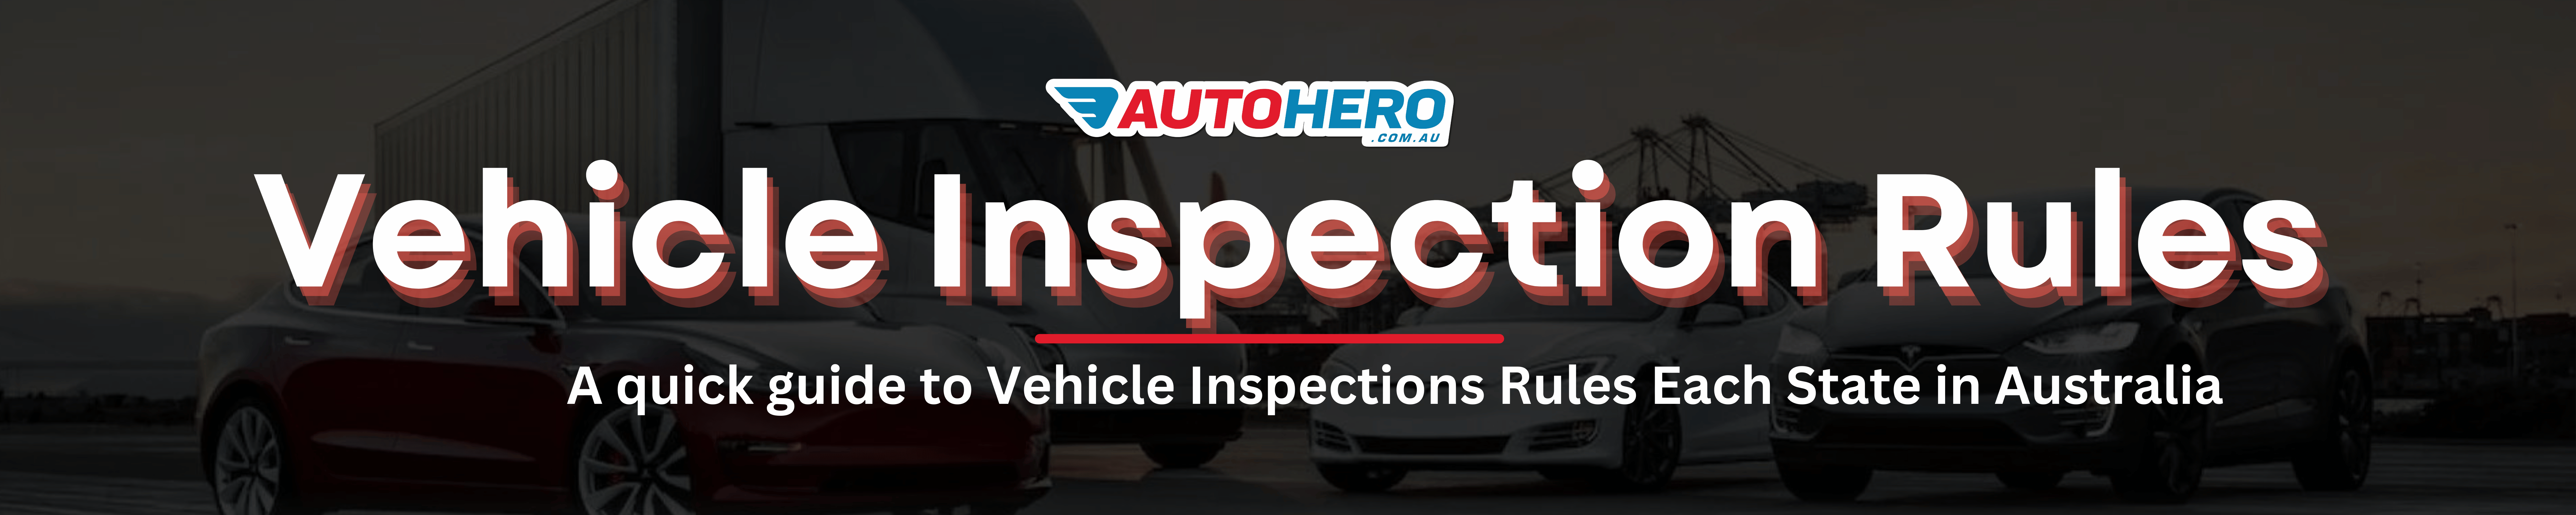 Vehicle Inspection Rules 